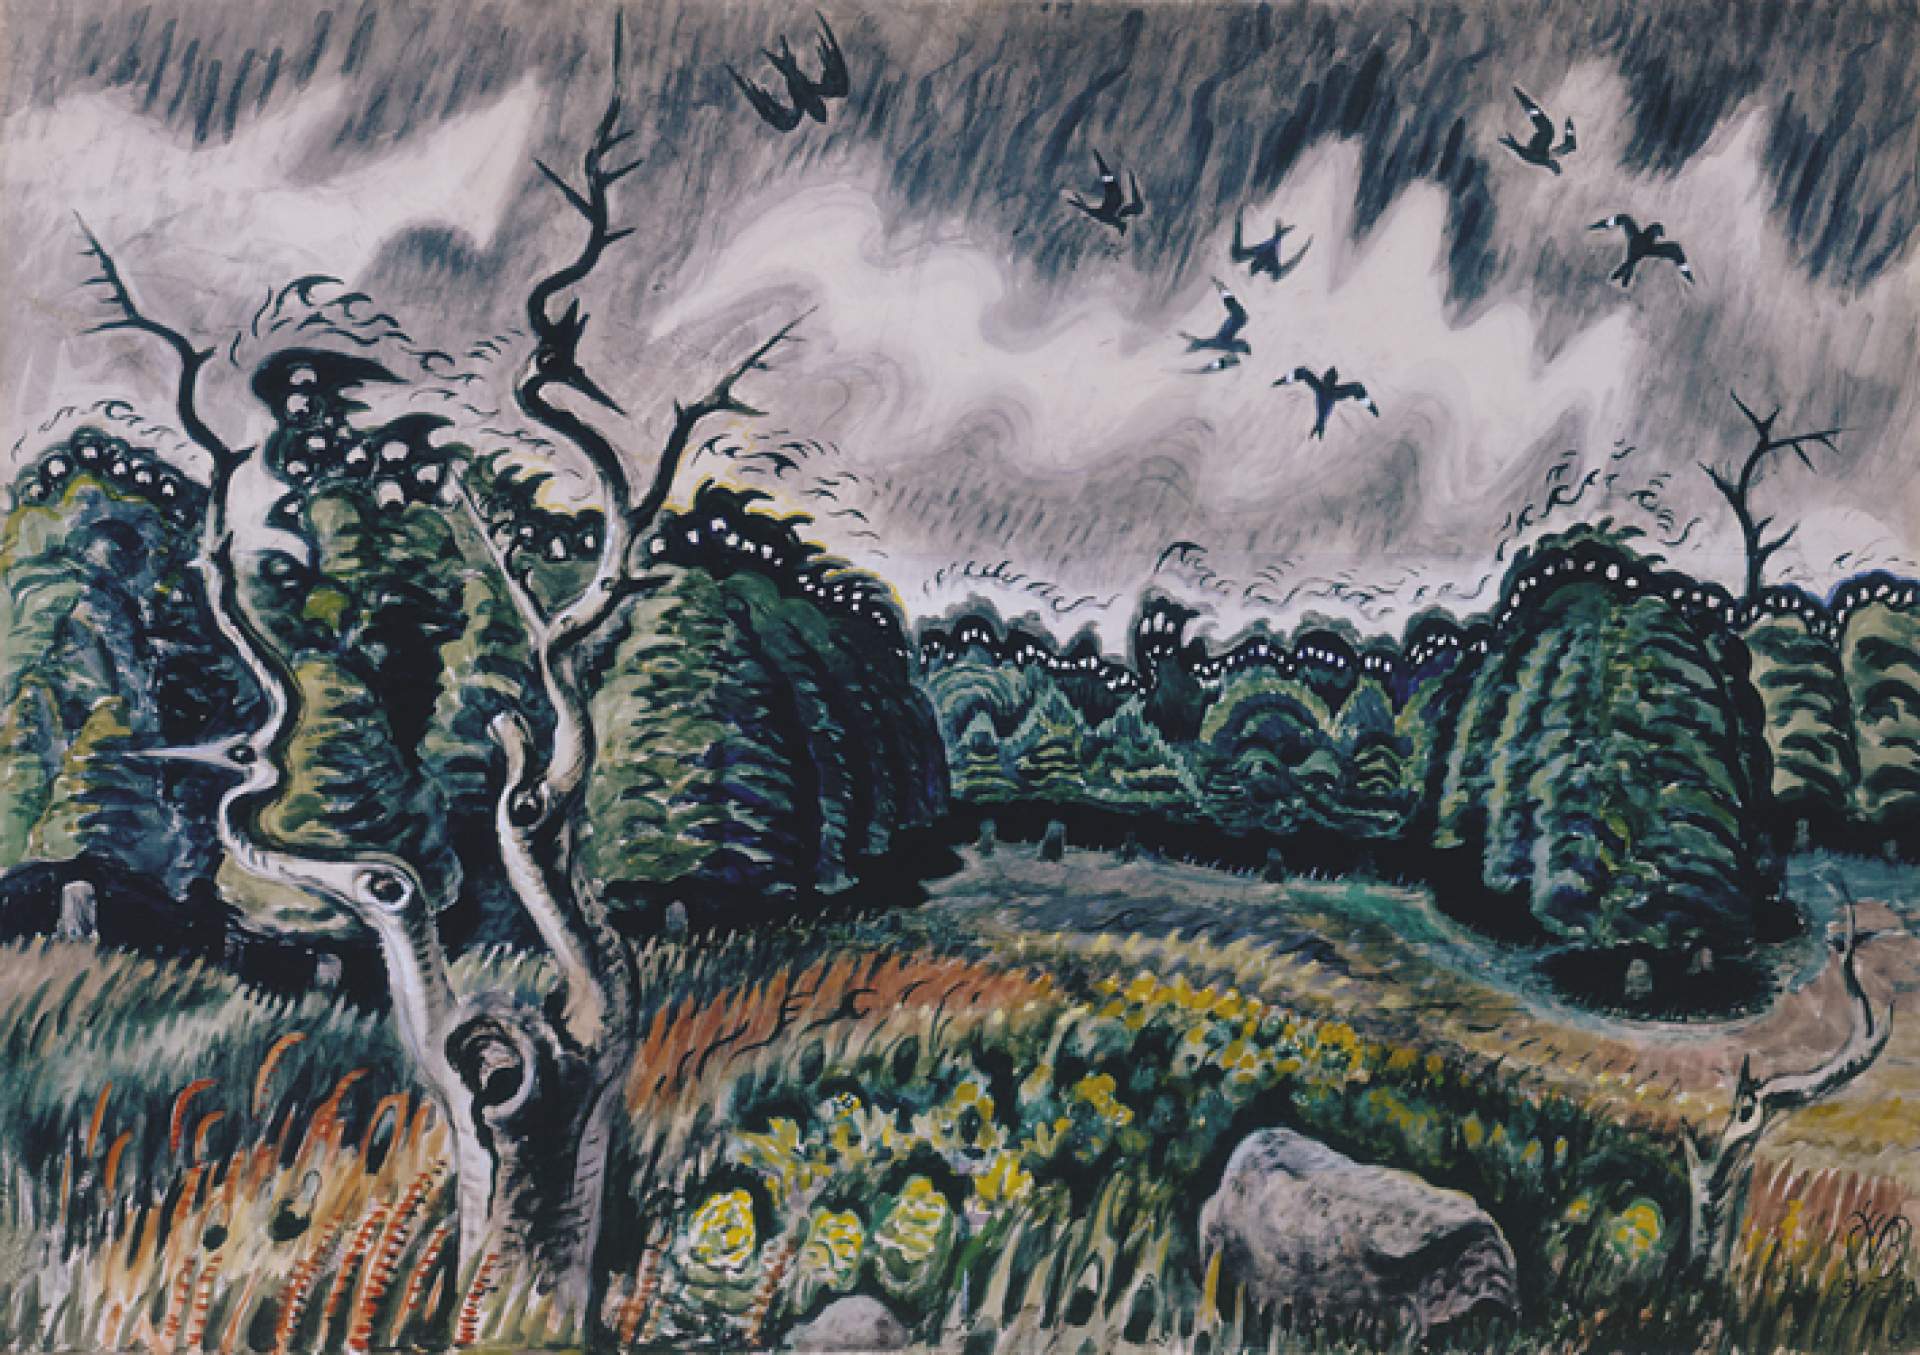 Acclaimed Burchfield exhibition “Exalted Nature” opens in Burchfield Penney in the Buffalo News